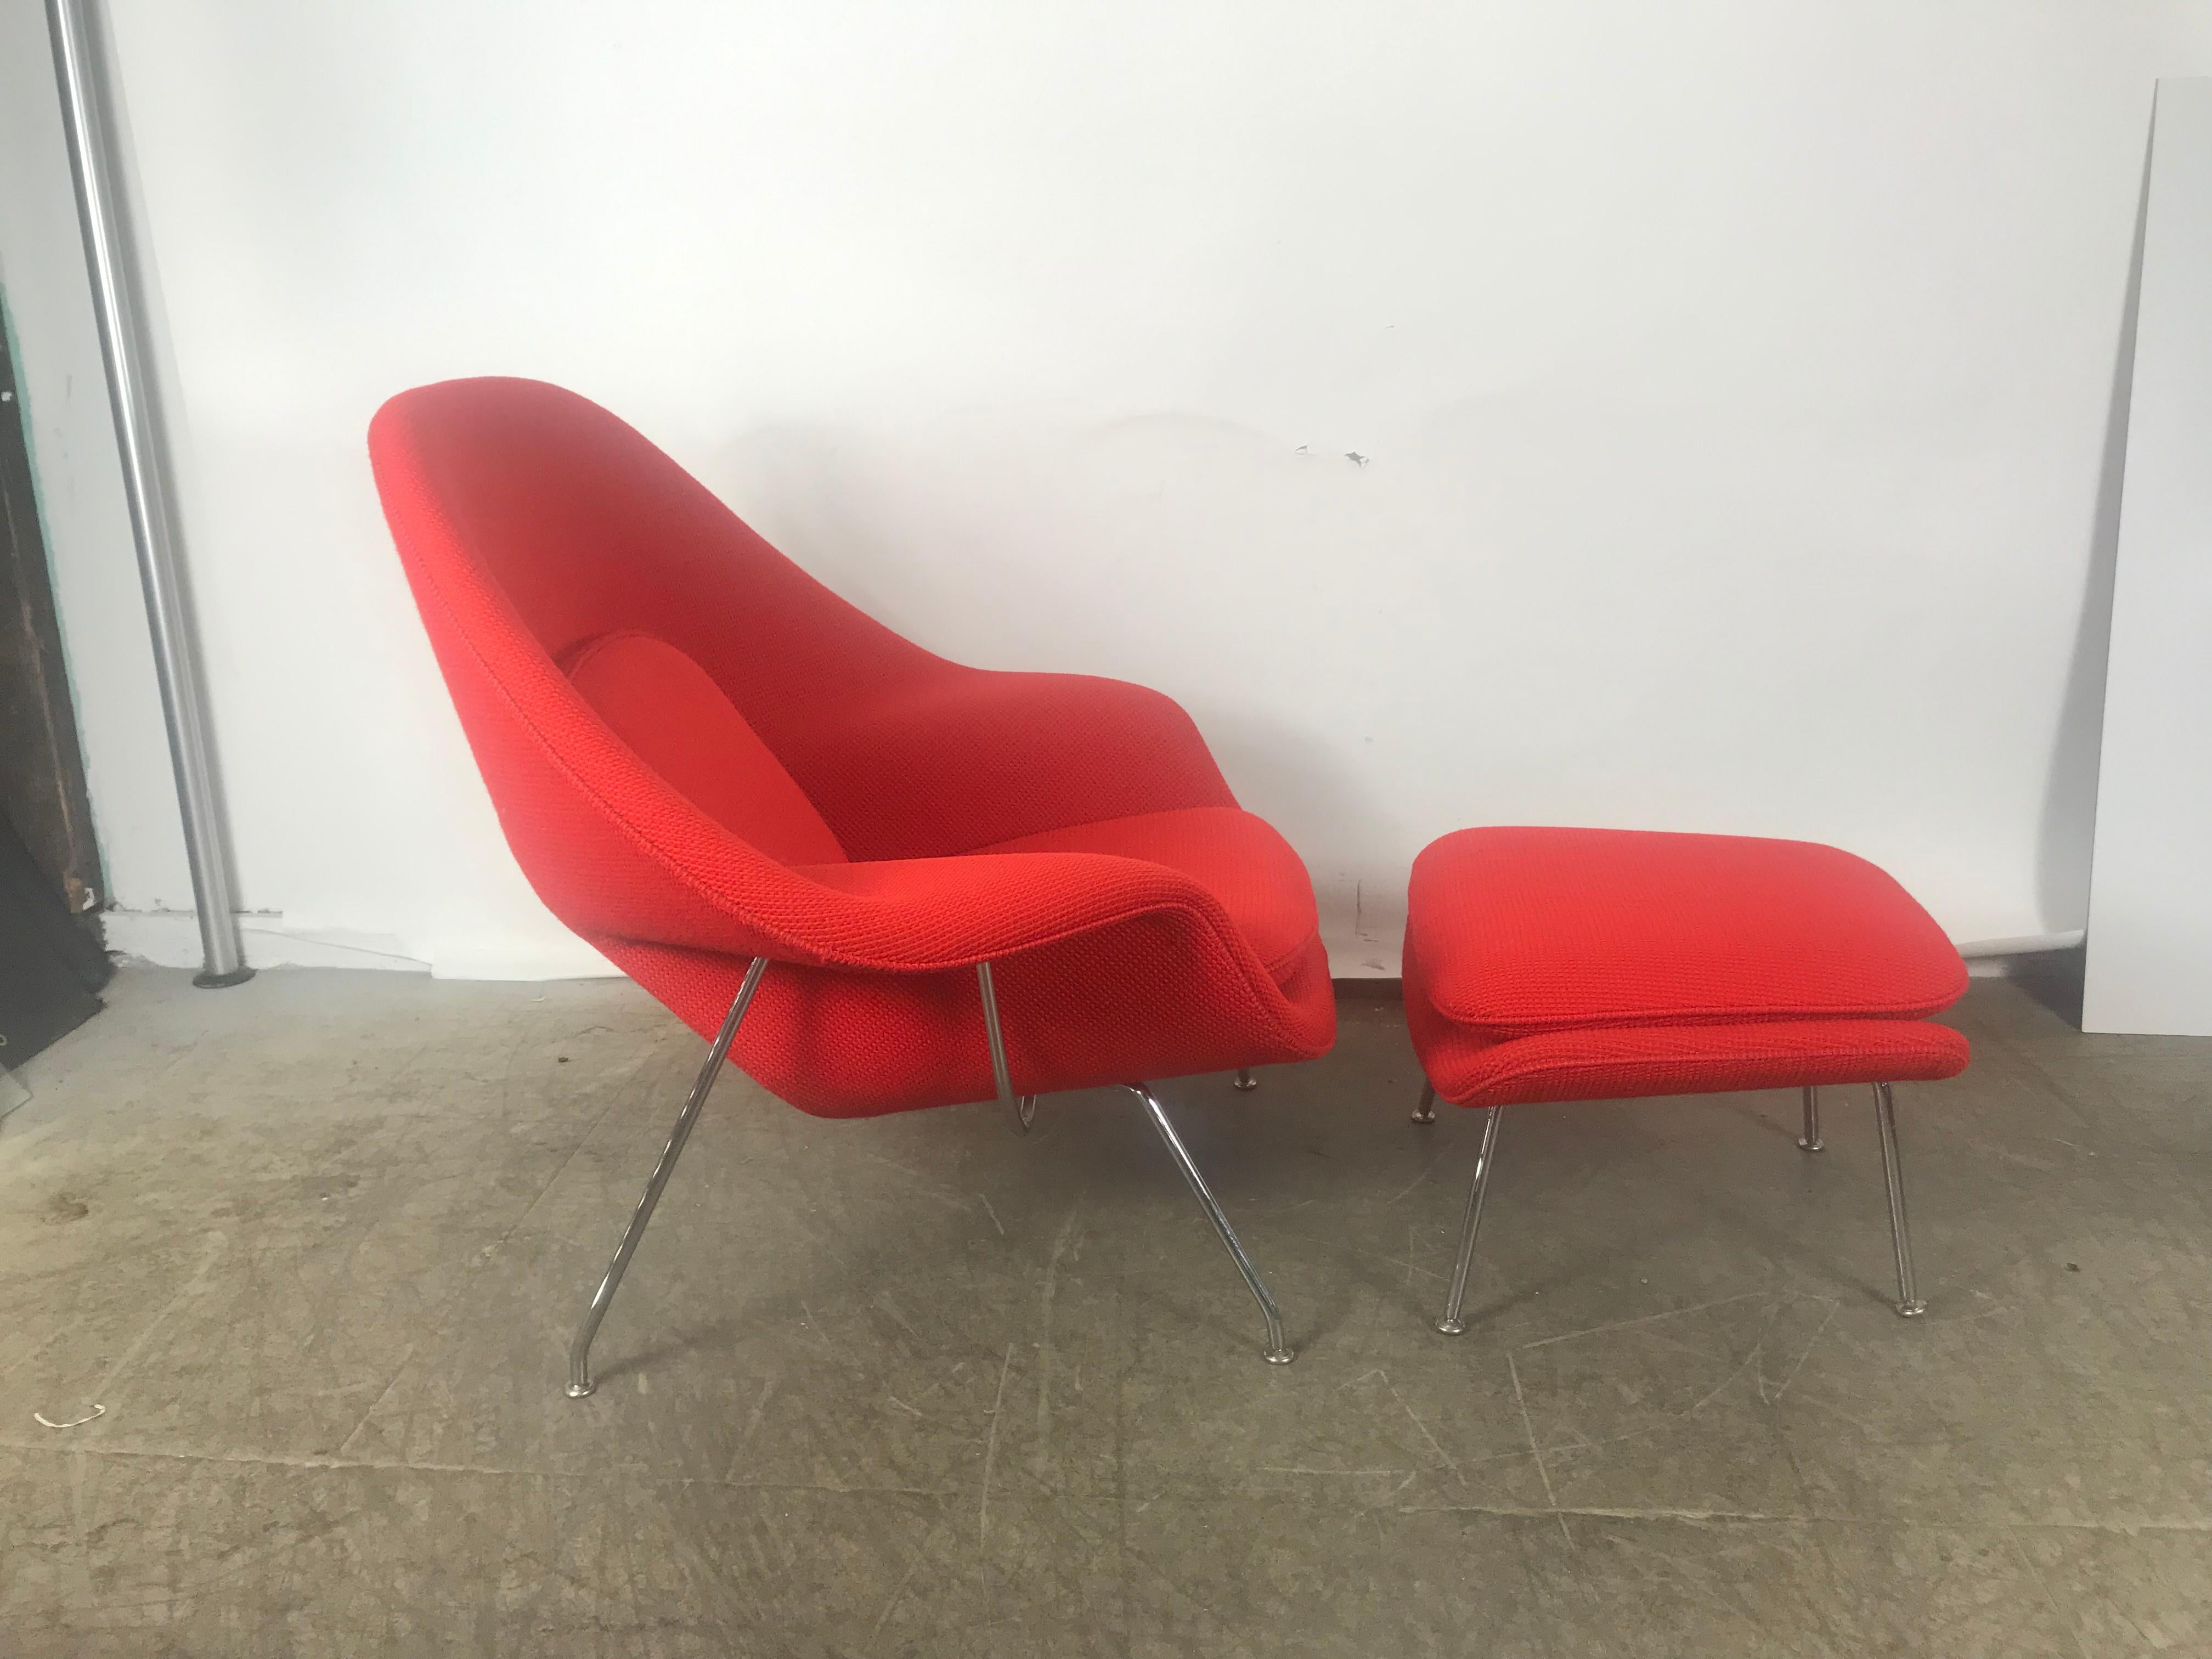 American Classic Midcentury Womb Chair and Ottoman by Eero Saarinen for Knoll